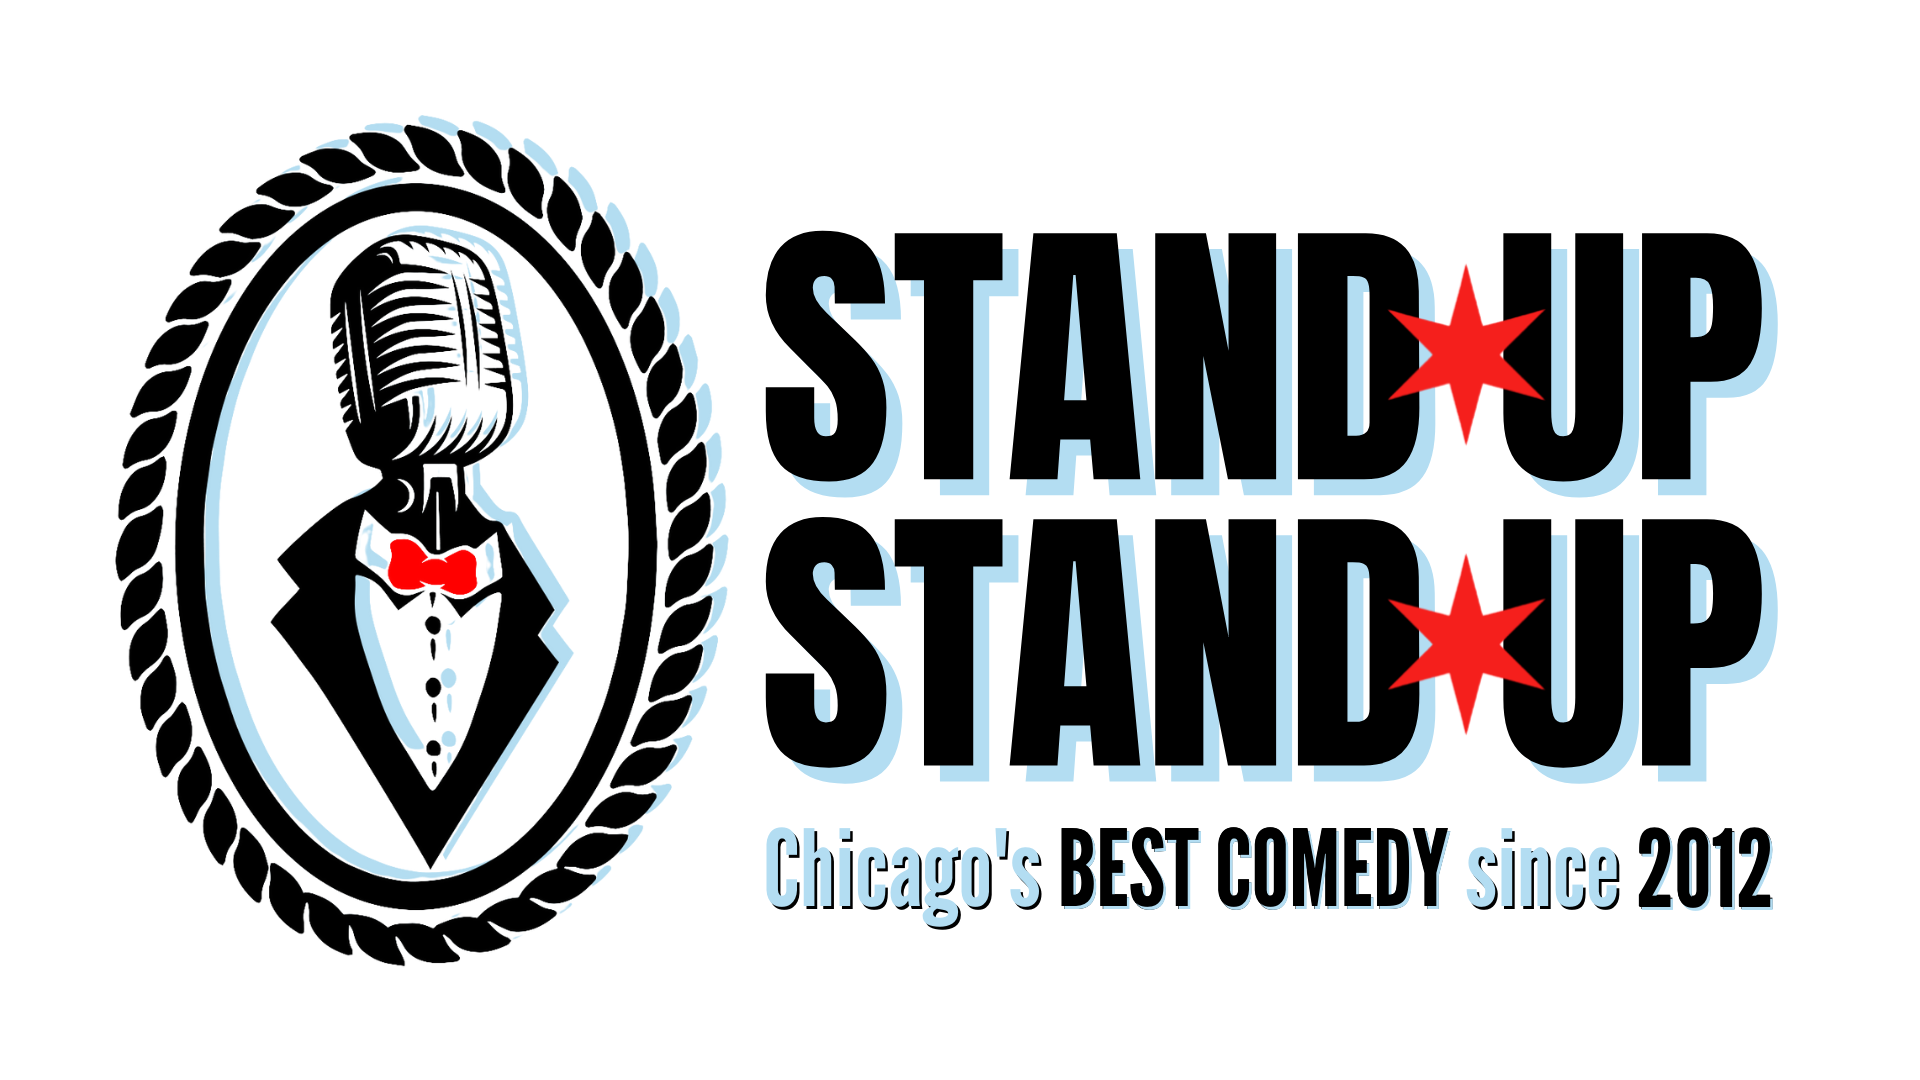 amateur comedy night and chicago